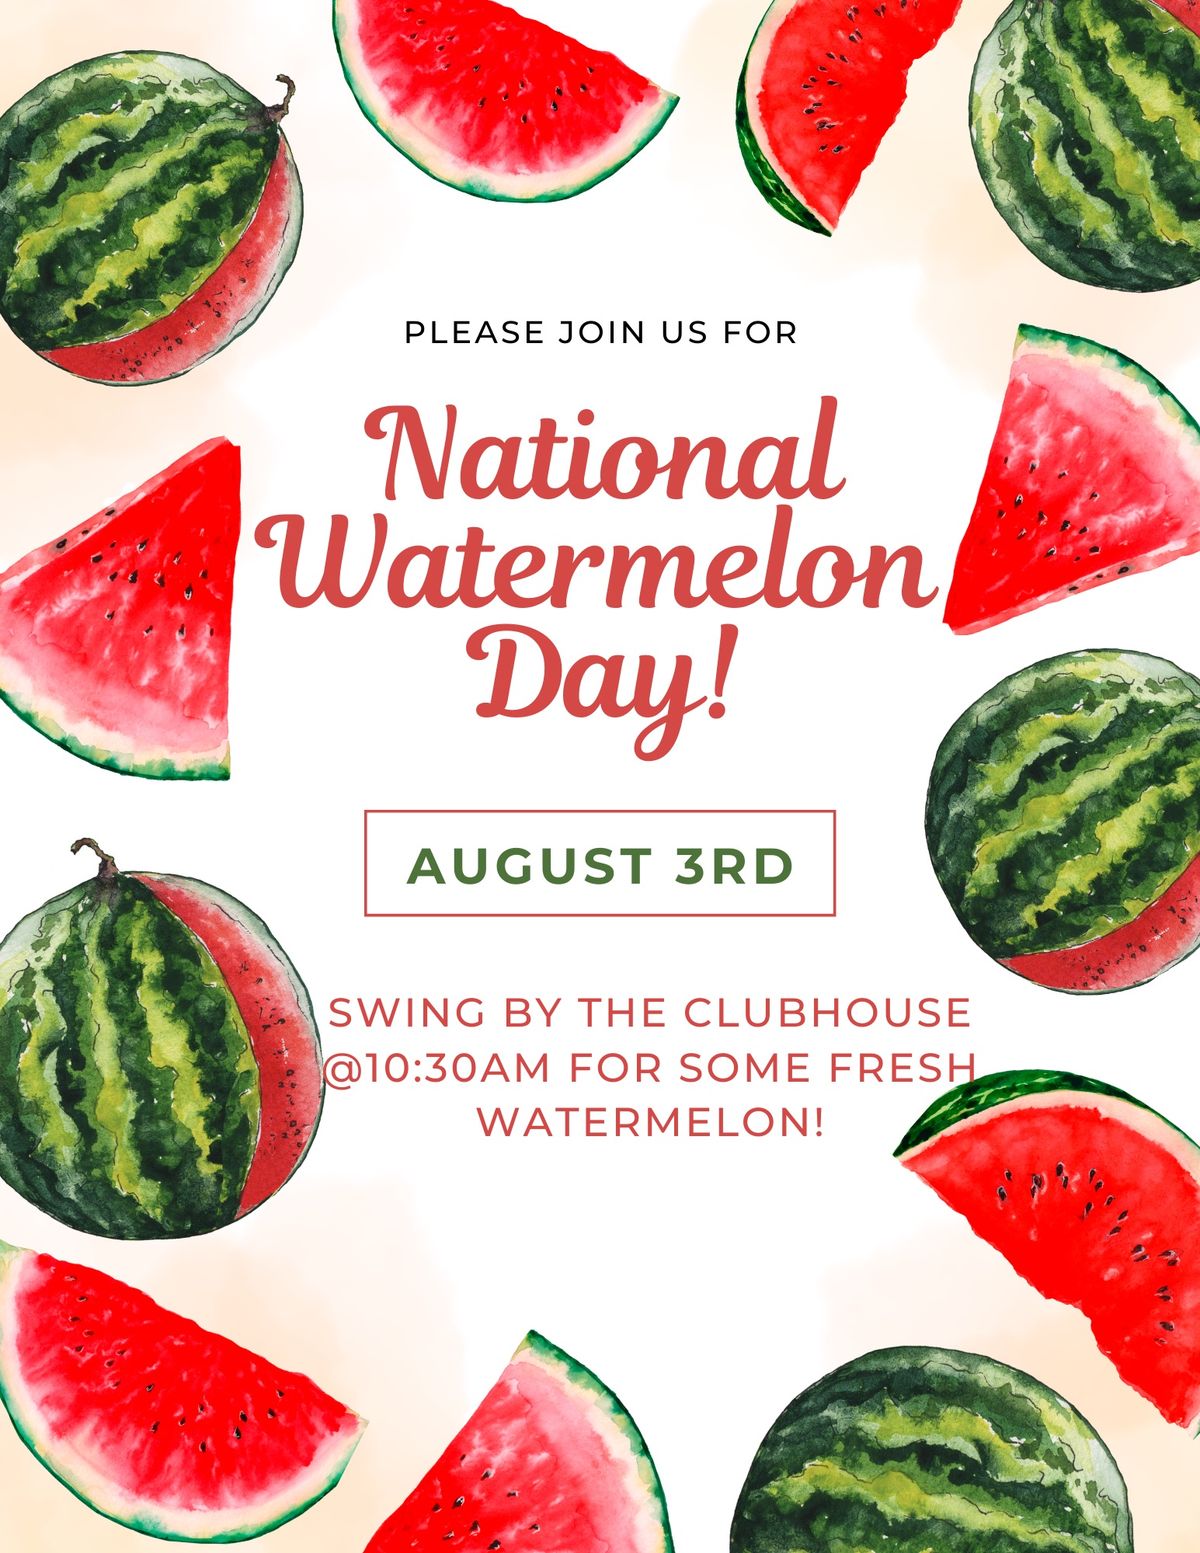 National Watermelon Day!